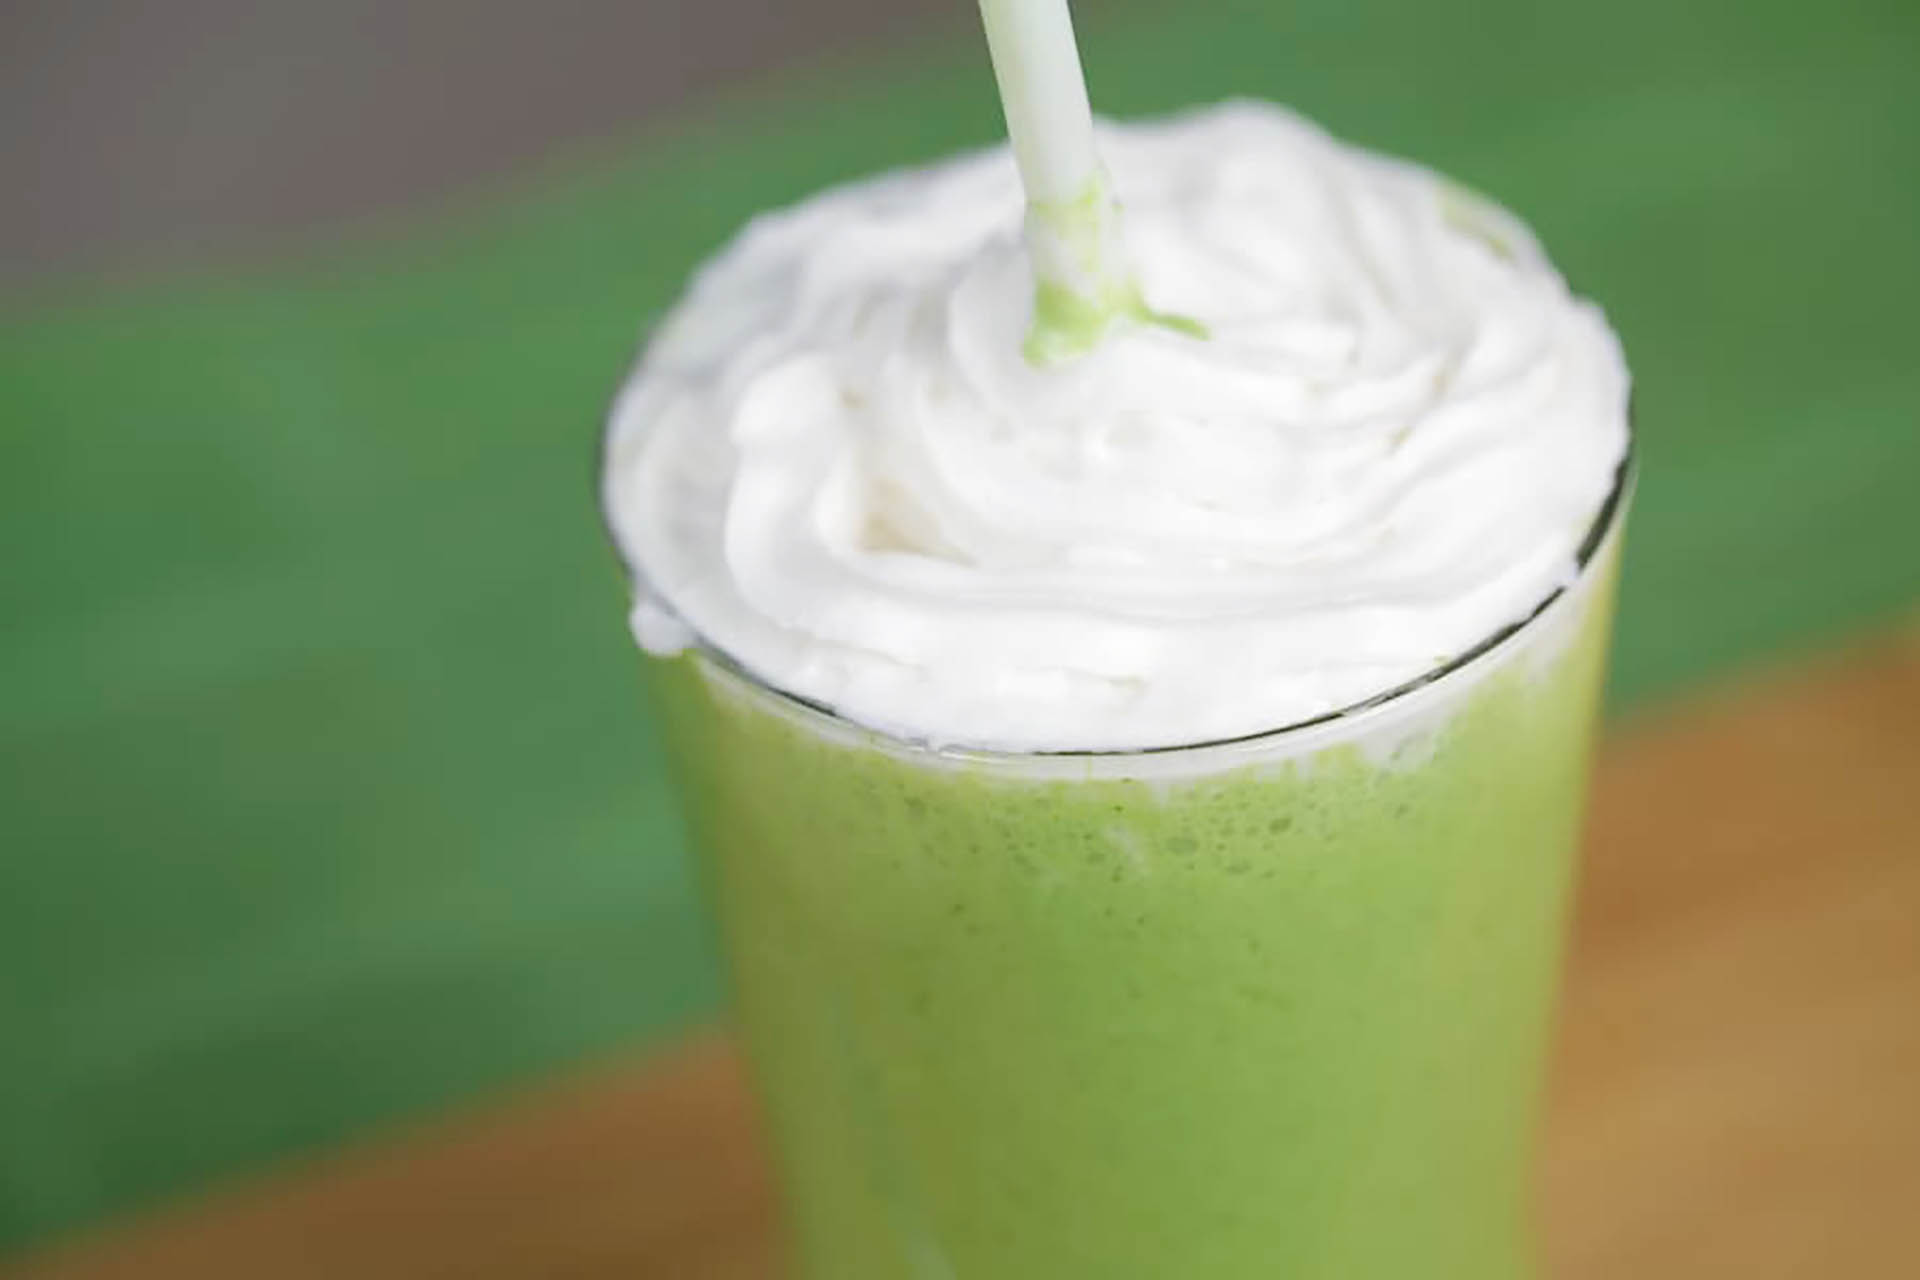 A shamrock shake with whipped topping